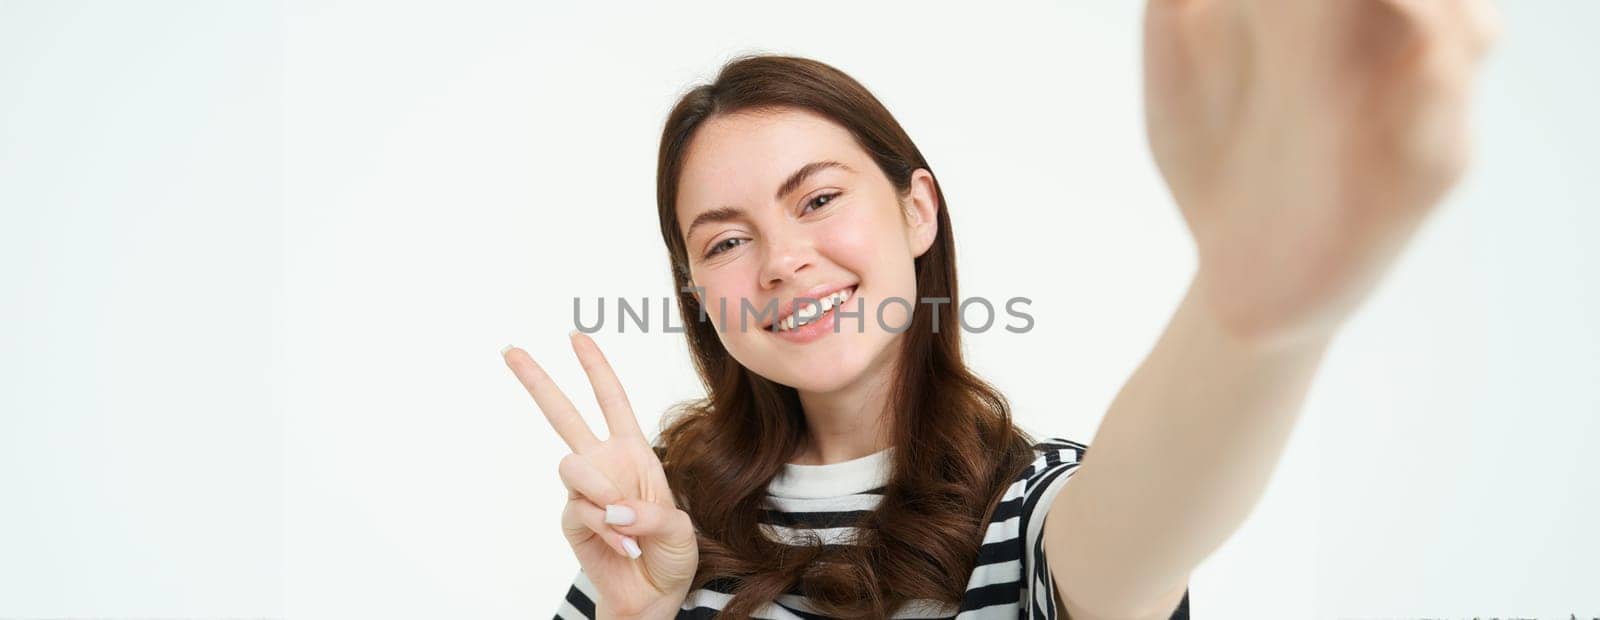 Smartphone view, woman holding mobile phone camera and taking selfie with peace, v-sign gesture, smiling at camera, posing over white background by Benzoix